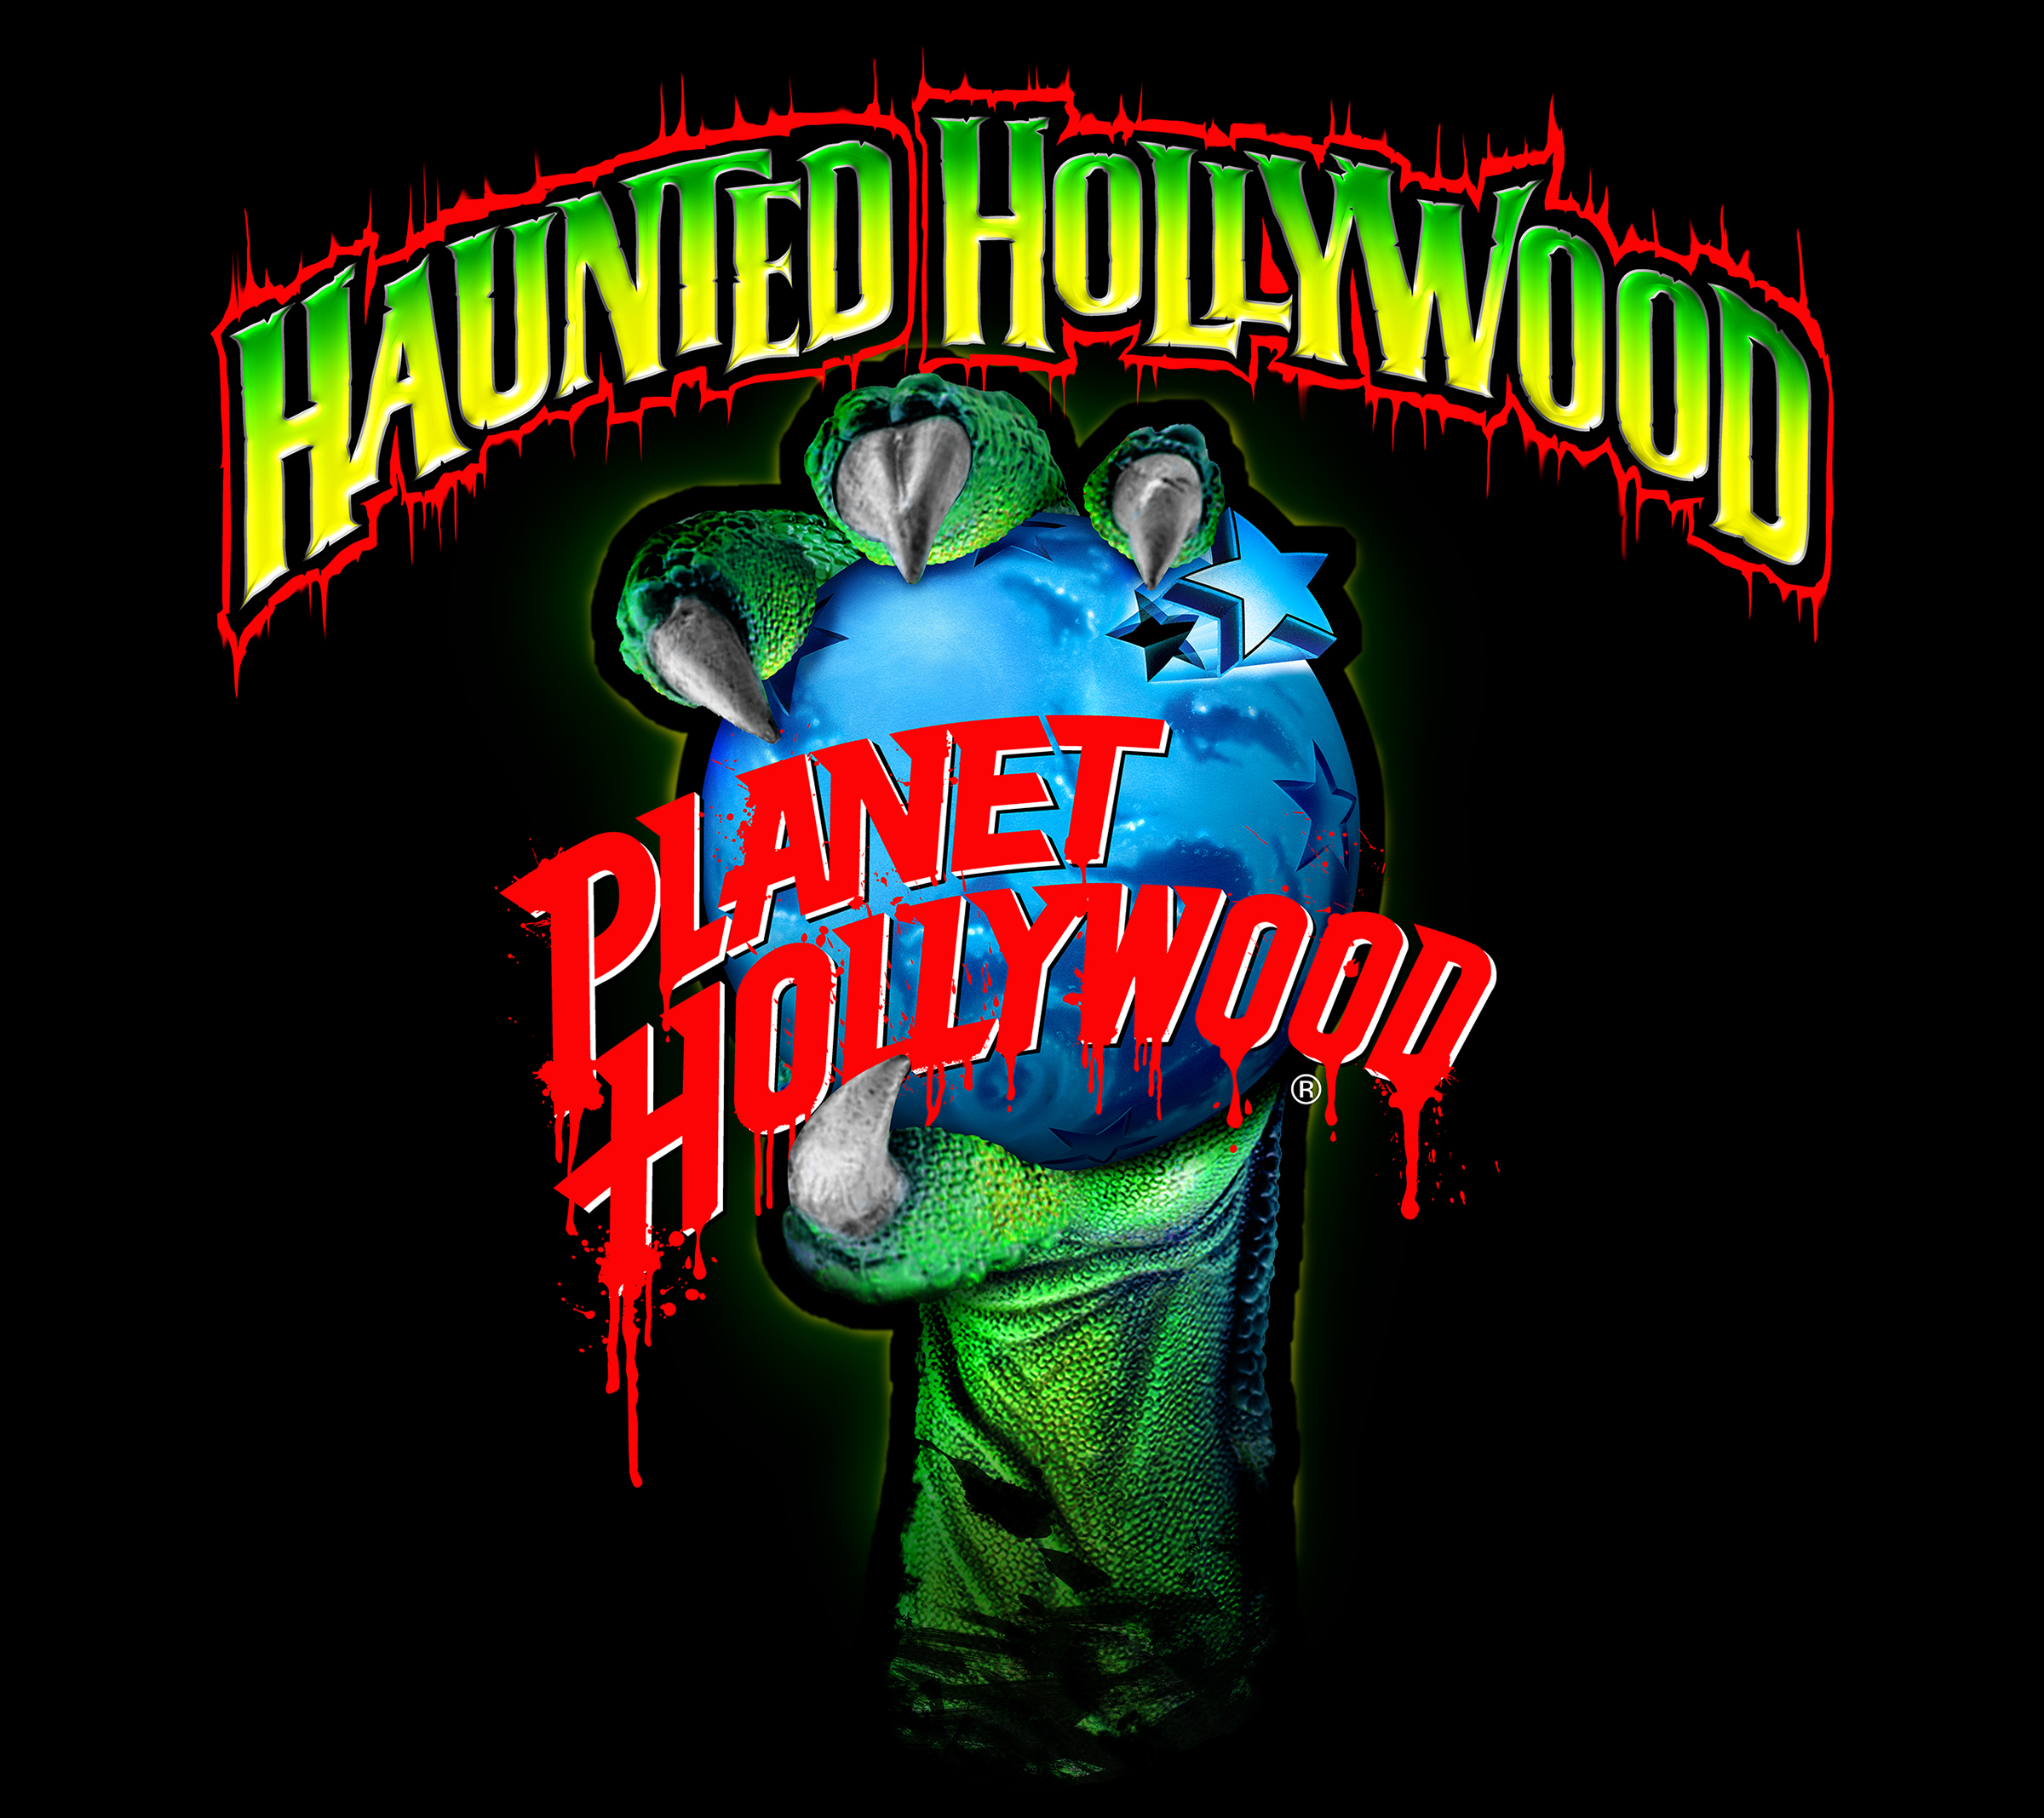 Haunted Planet Hollywood